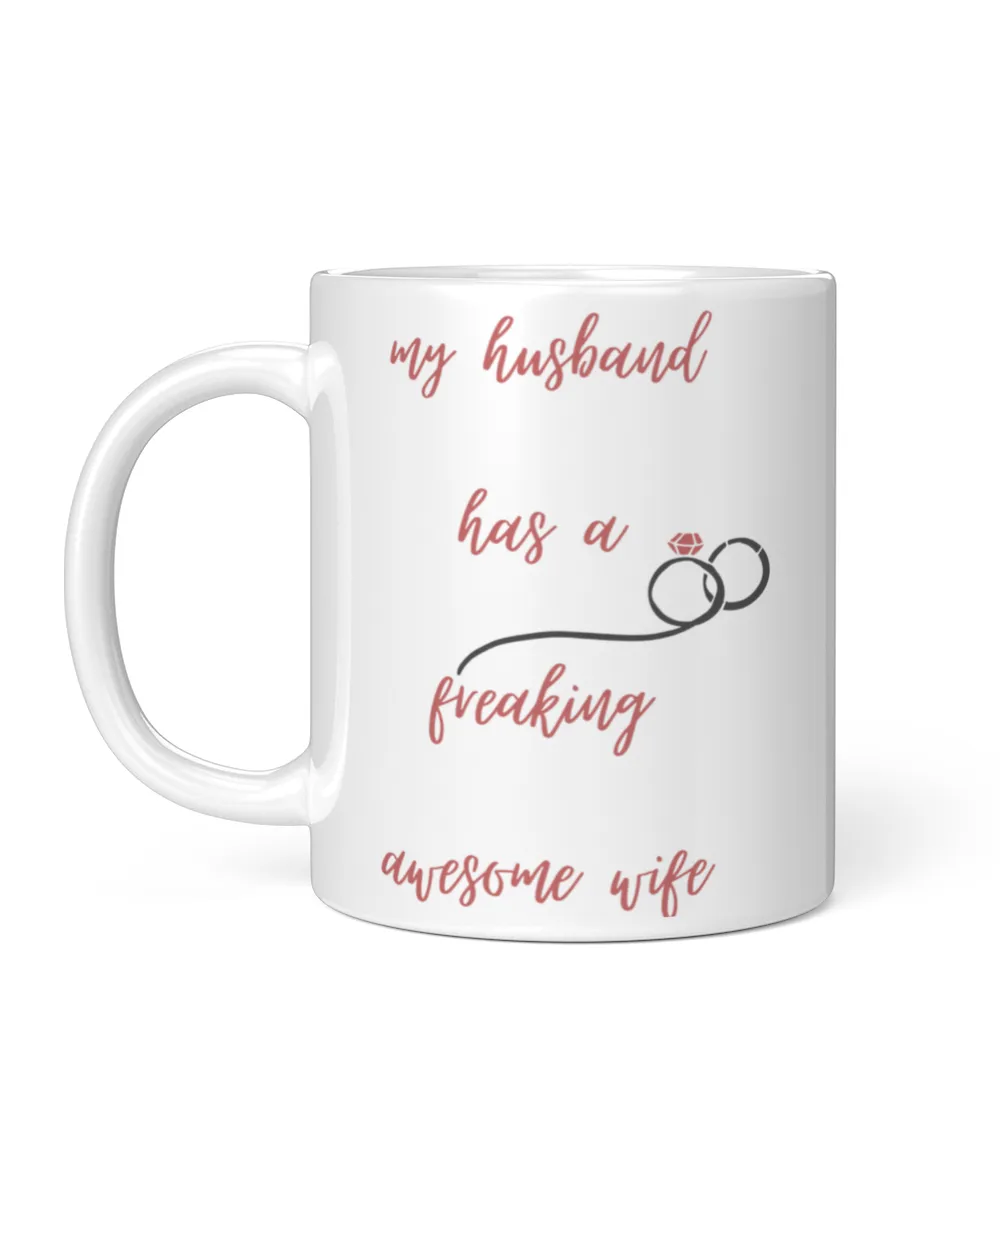 my husband has a freaking awesome wife Tshirt8732 T-Shirt